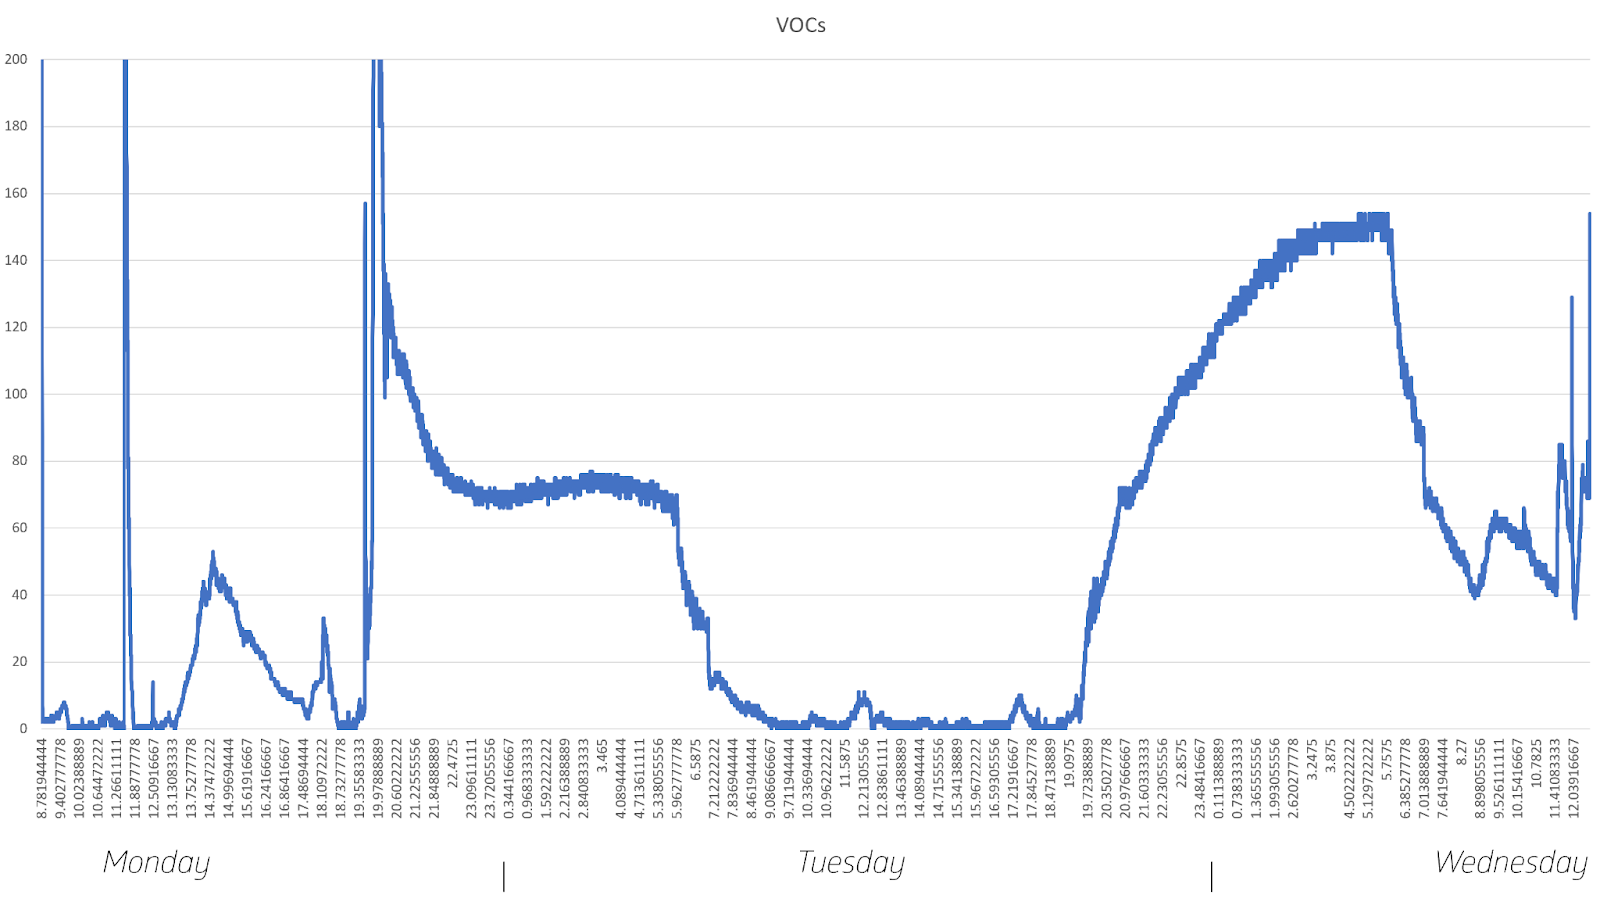 Line graph showing change in VOCs over 3 days' time. Visible spikes in each evening, with drops in the morning and workday.